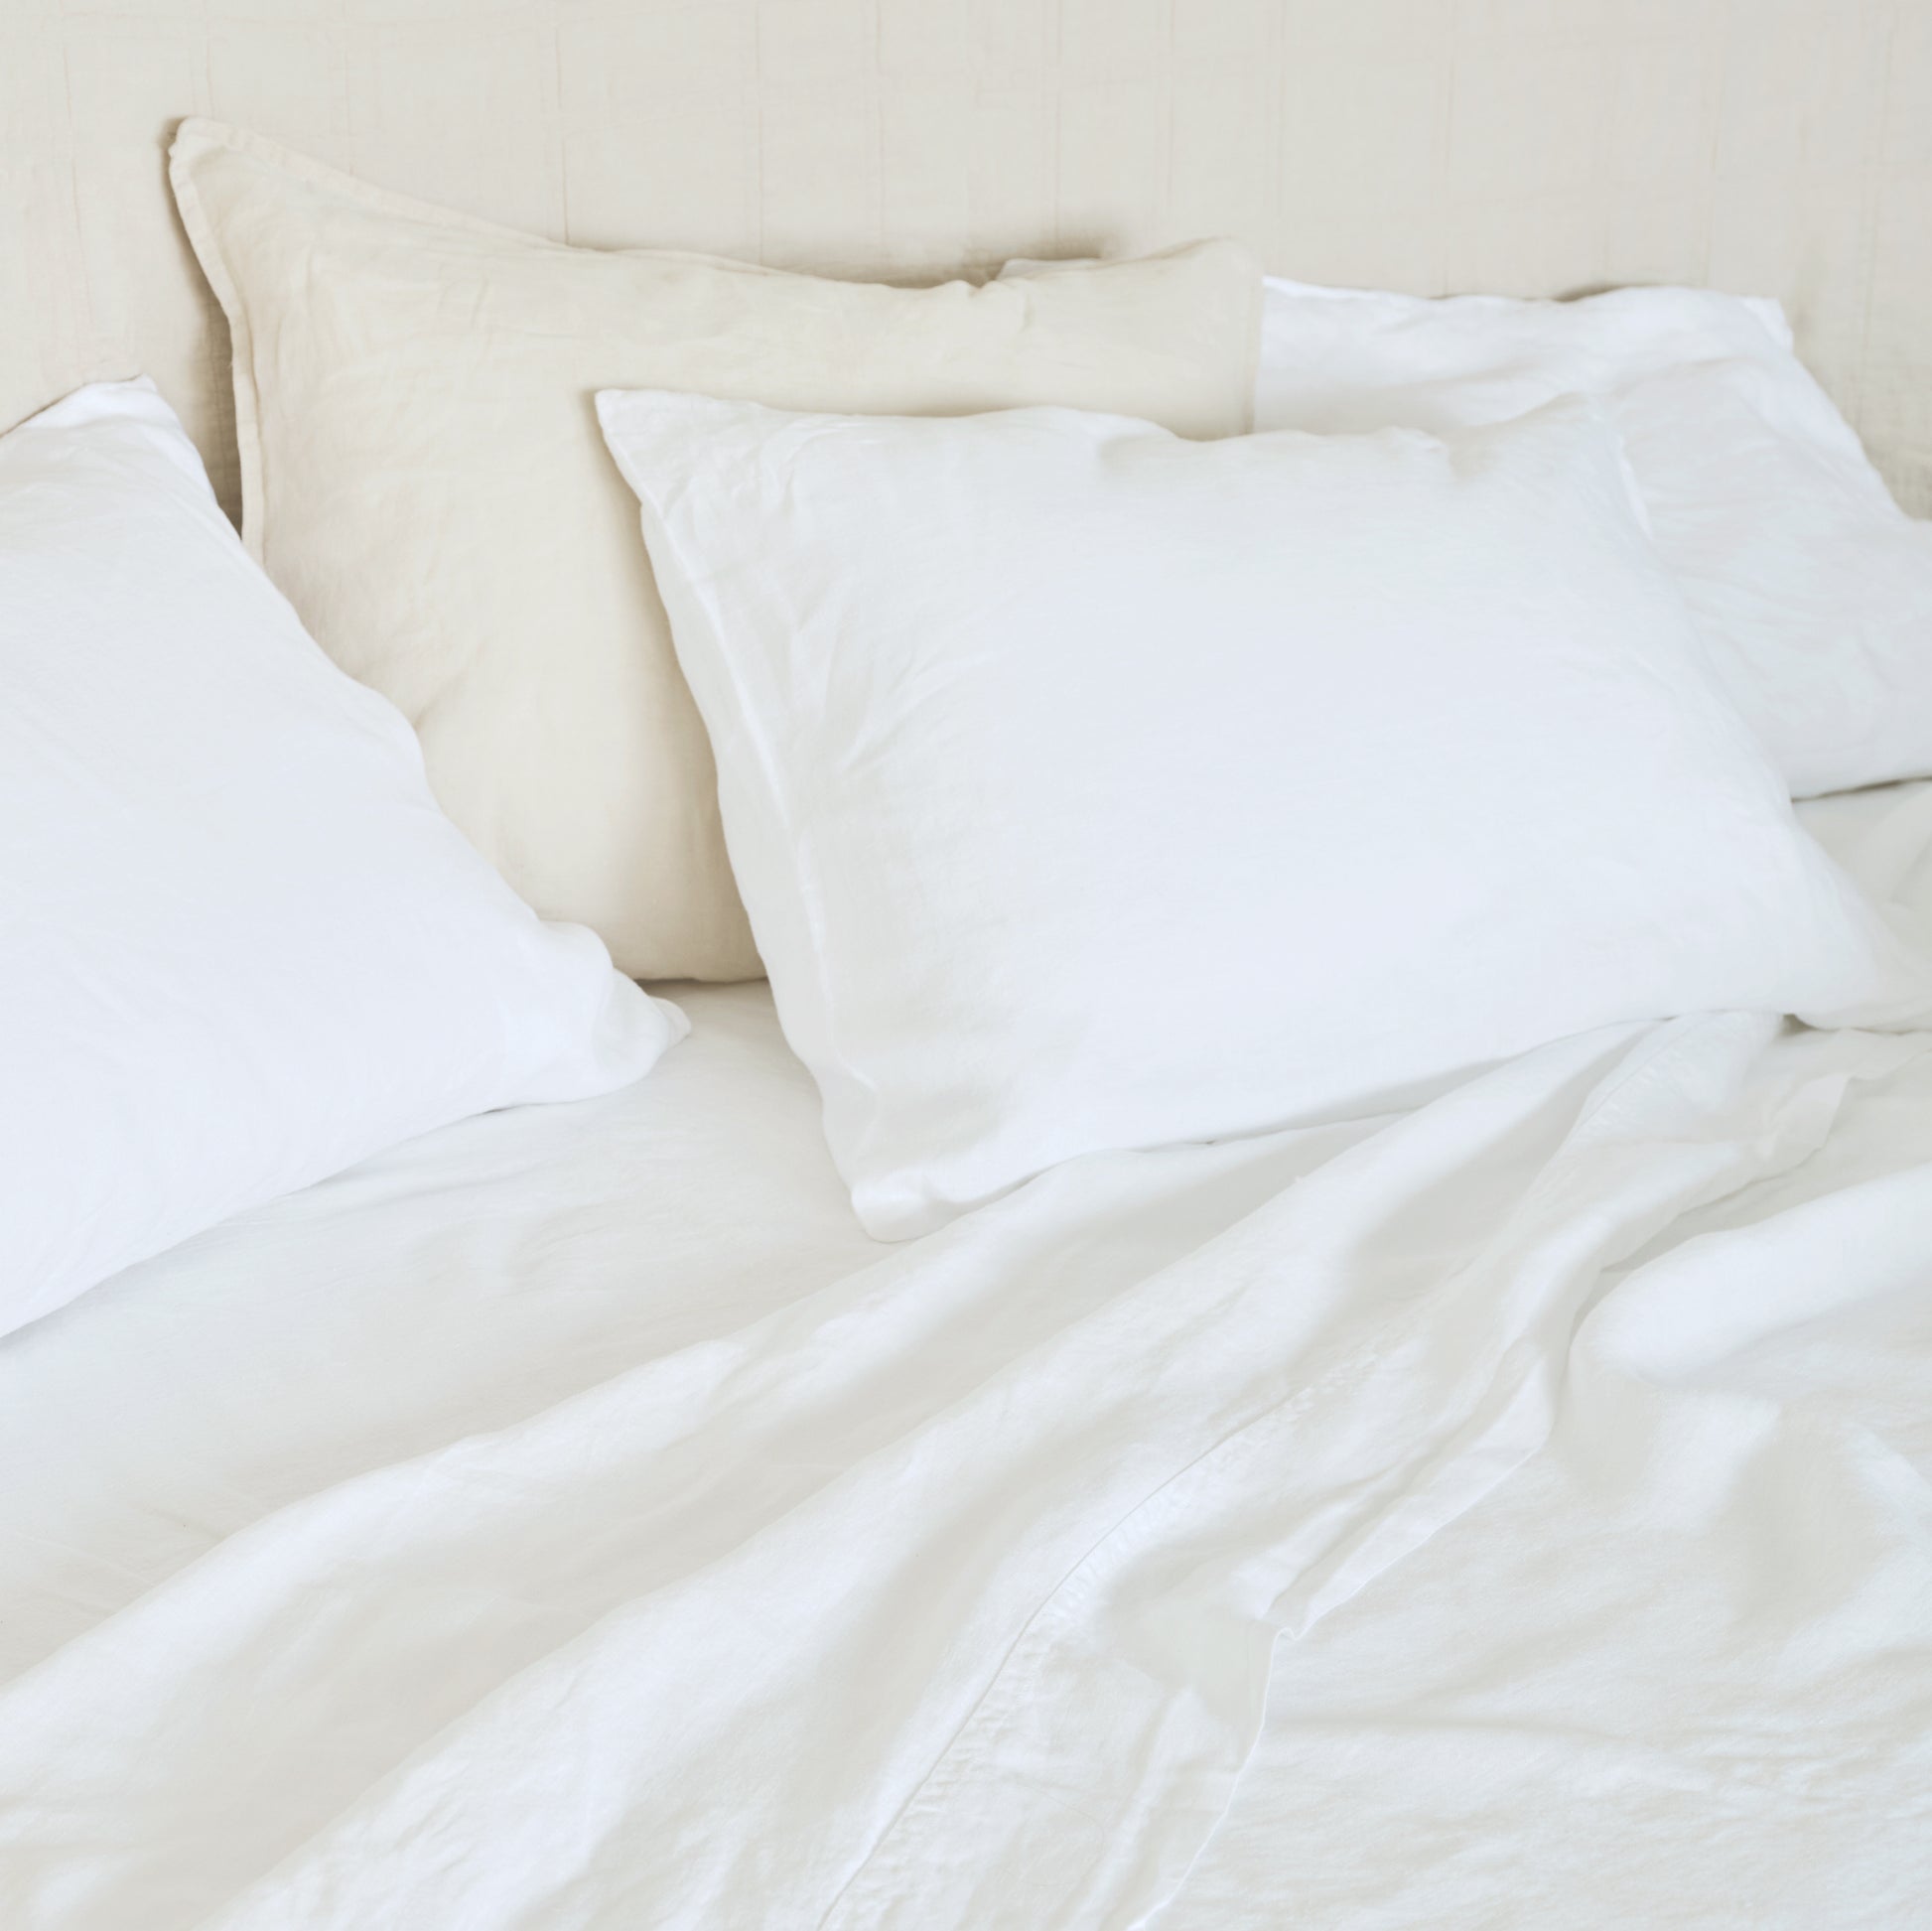 Evenfall Sheets | Jungmaven Hemp Clothing & Accessories / Color: Washed White